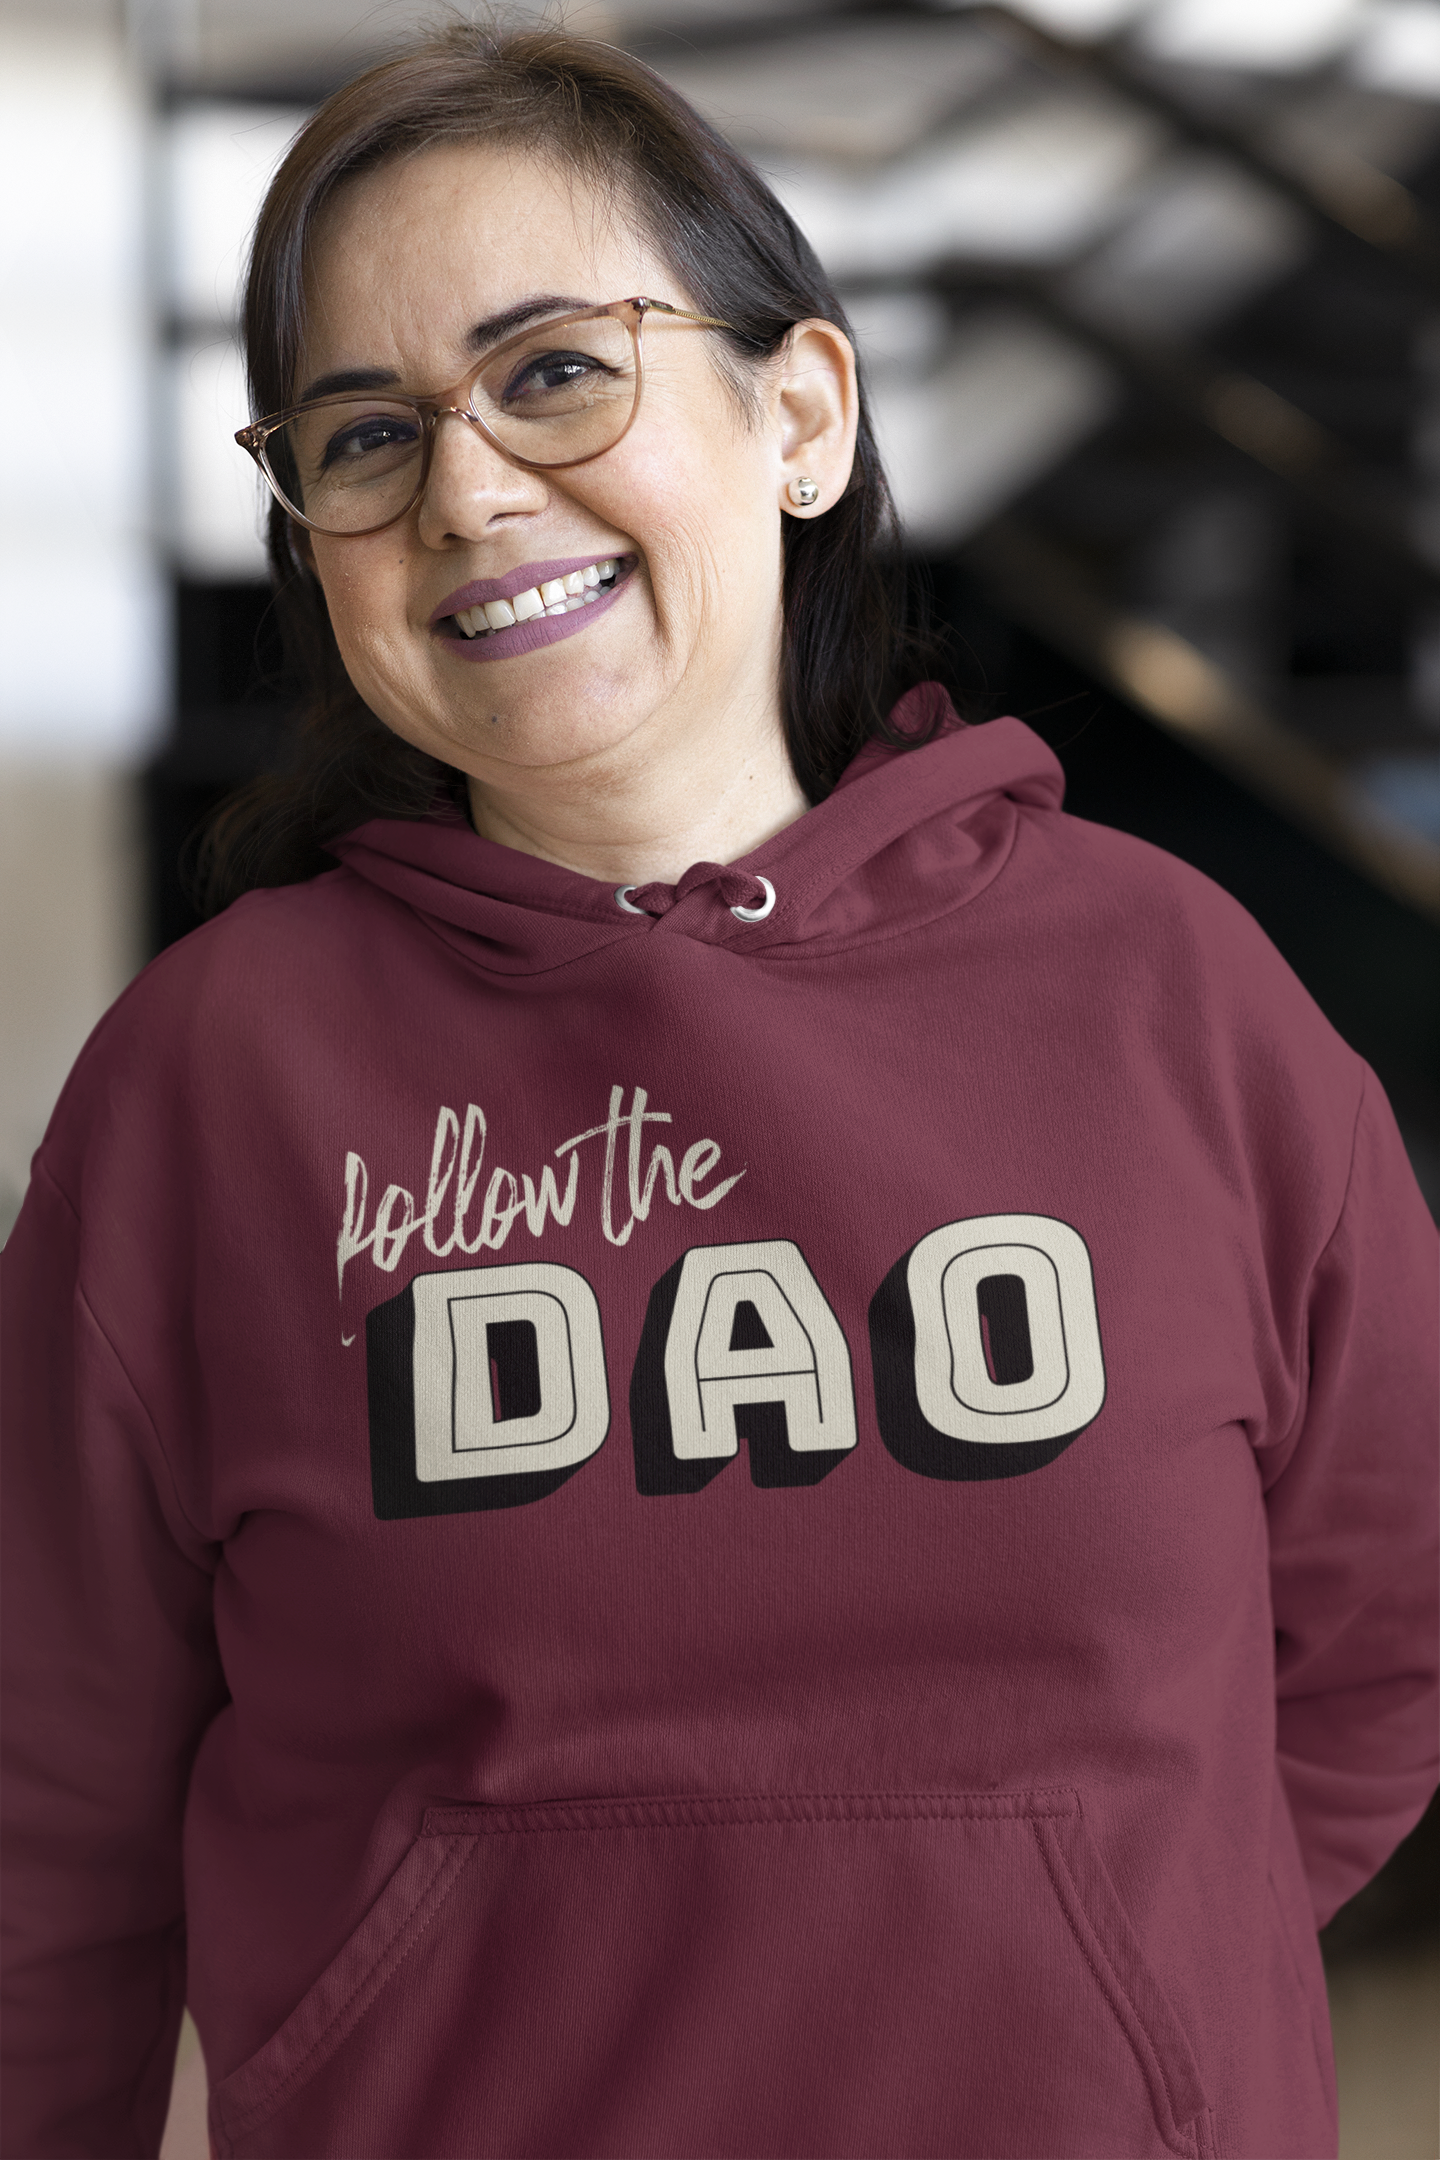 a smiling lady wearing burgundy hoodie with blocky follow the dao design on front